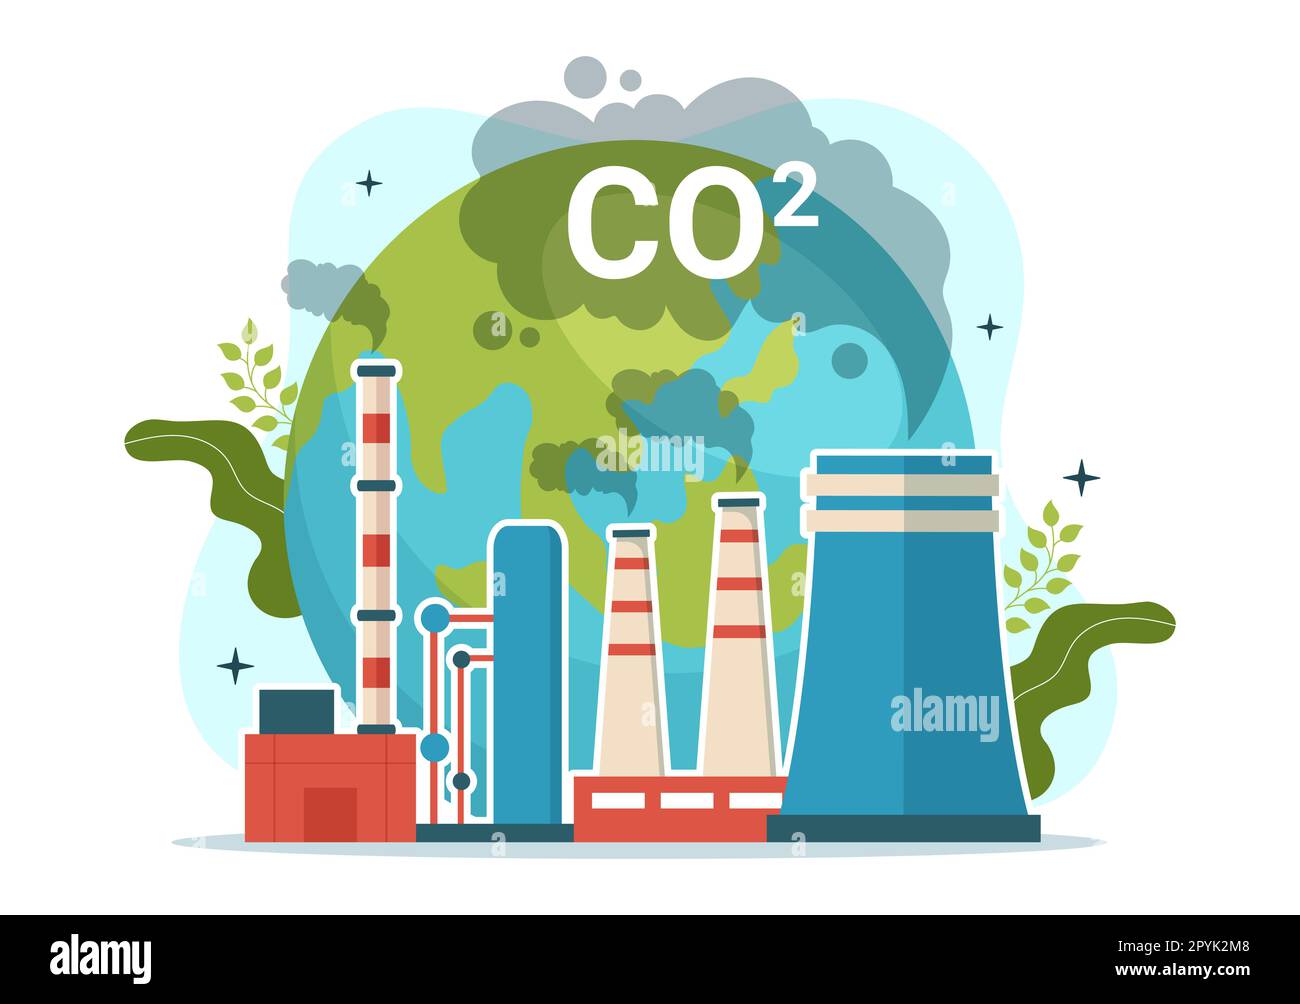 Carbon Dioxide or CO2 Illustration to Save Planet Earth from Climate Change as a Result of Factory and Vehicle Pollution in Hand Drawn Templates Stock Photo